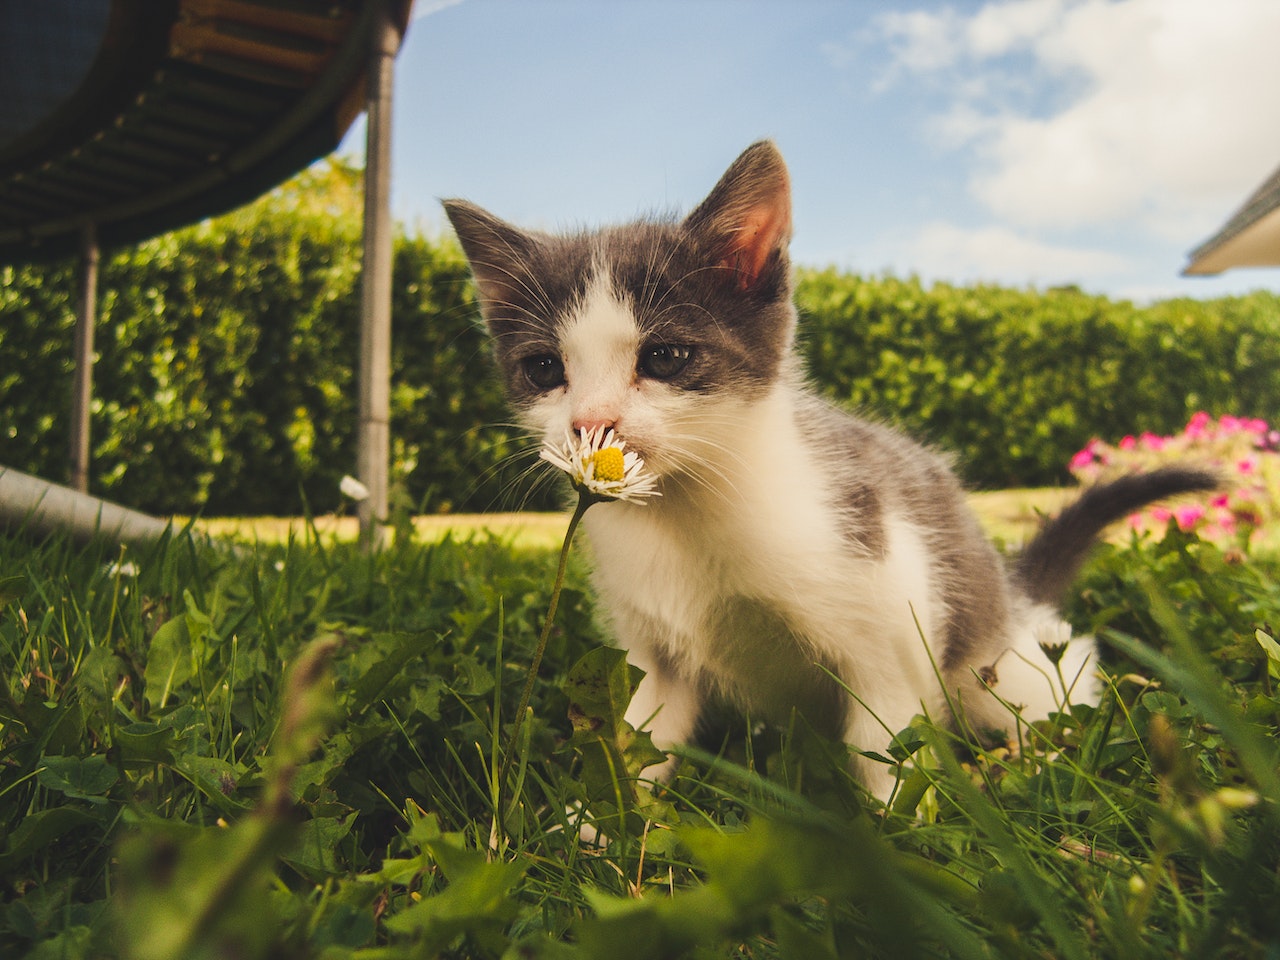 In the photo, there's a young kitten with a white and gray coat. The kitten appears to be in a playful or curious posture, situated outdoors on a patch of green grass. It's biting or sniffing a white daisy-like flower with a yellow center, which stands out against its white fur. The kitten's eyes are prominently focused, possibly indicating curiosity or playfulness. The background shows a garden setting with a neatly trimmed hedge, pink flowers in the distance, a portion of what appears to be a wooden structure (possibly a part of a bench or a deck), and a metal post. The sky overhead is clear with a hint of clouds, suggesting a sunny day. The overall ambiance of the photo is vibrant and lively, with a blend of natural colors